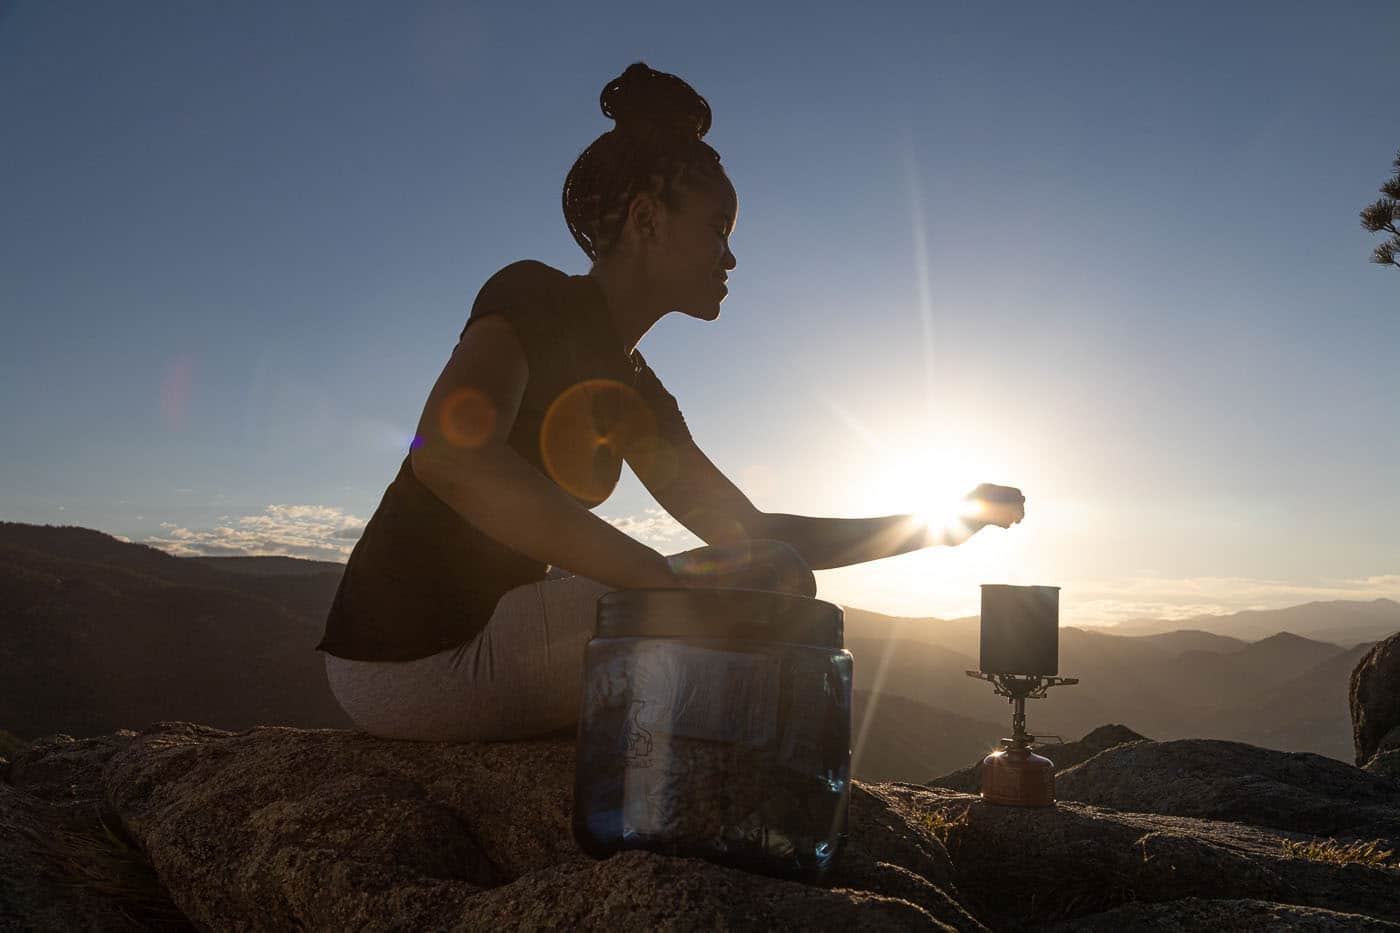 Woman boiling a menstrual cup for hiking on her period in a pot while camping